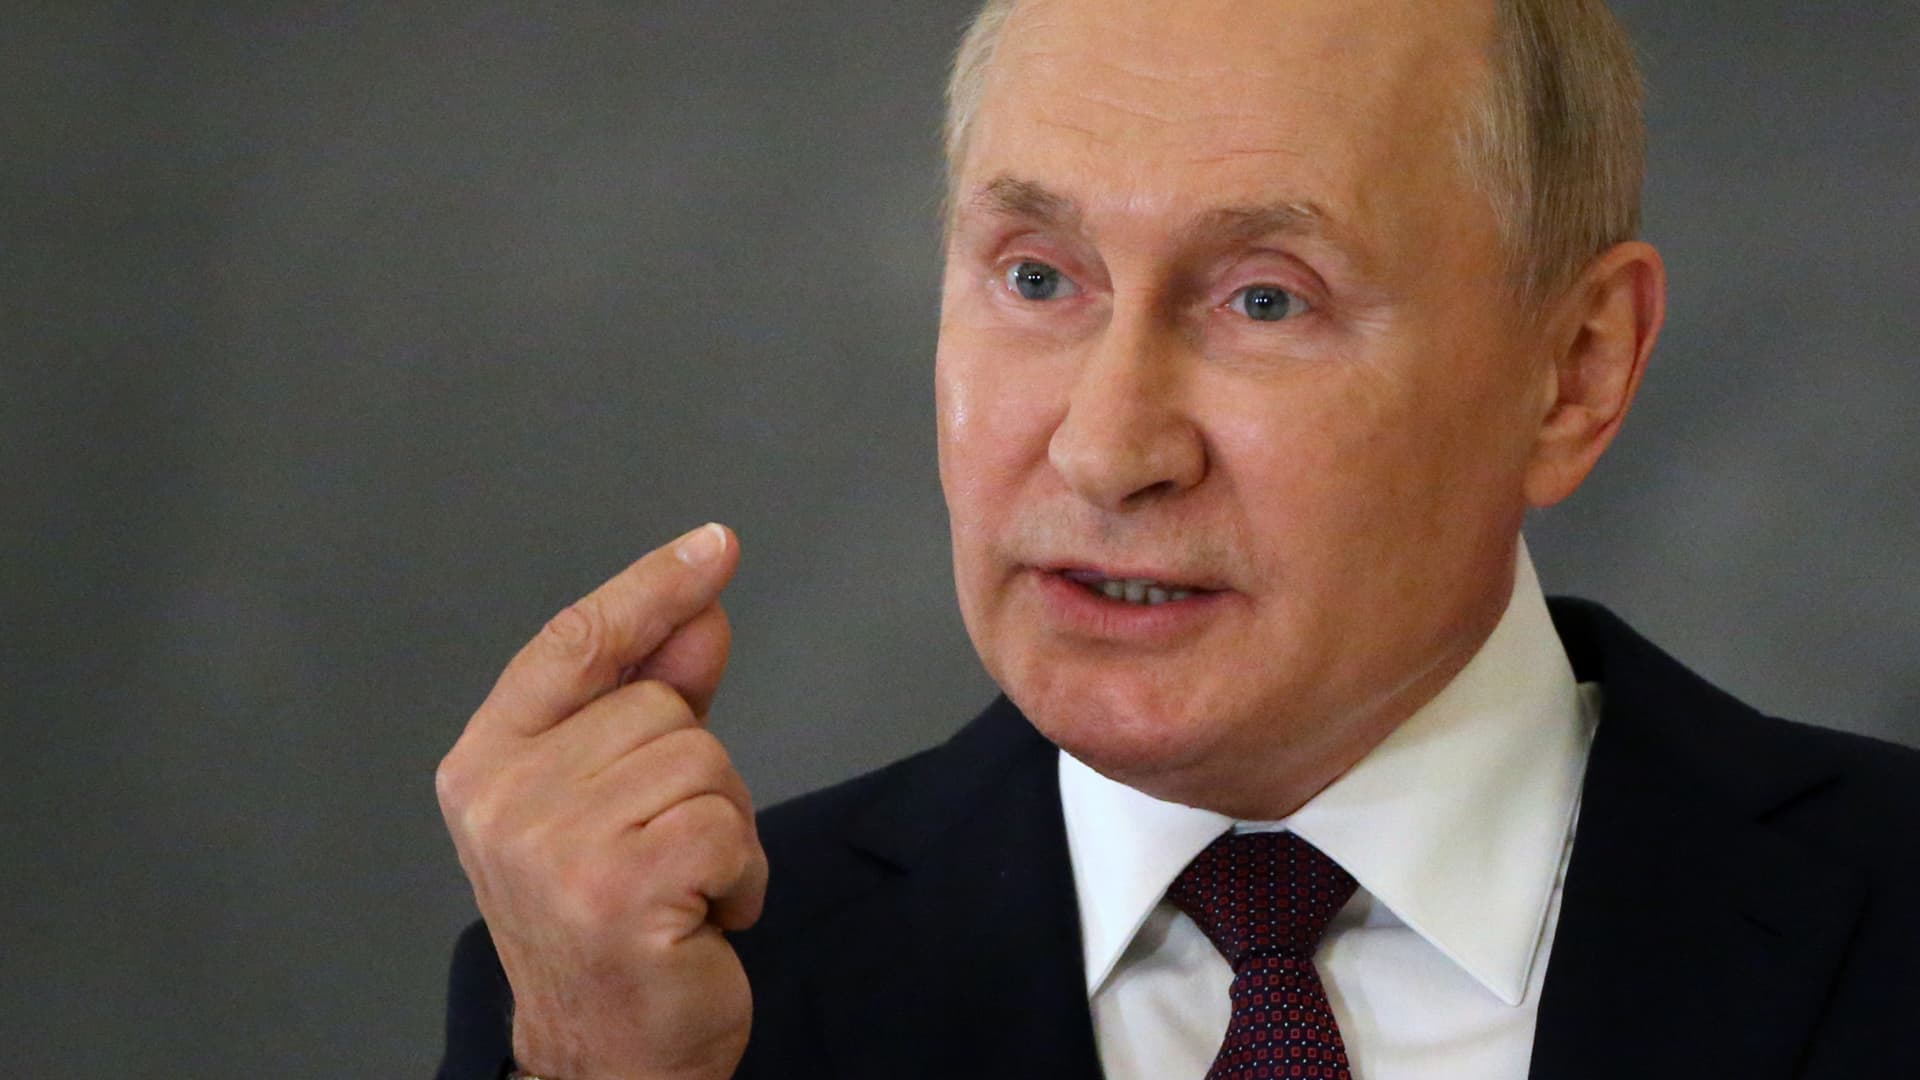 Without a hint of irony over Ukraine, Putin rages against countries that meddle in other states